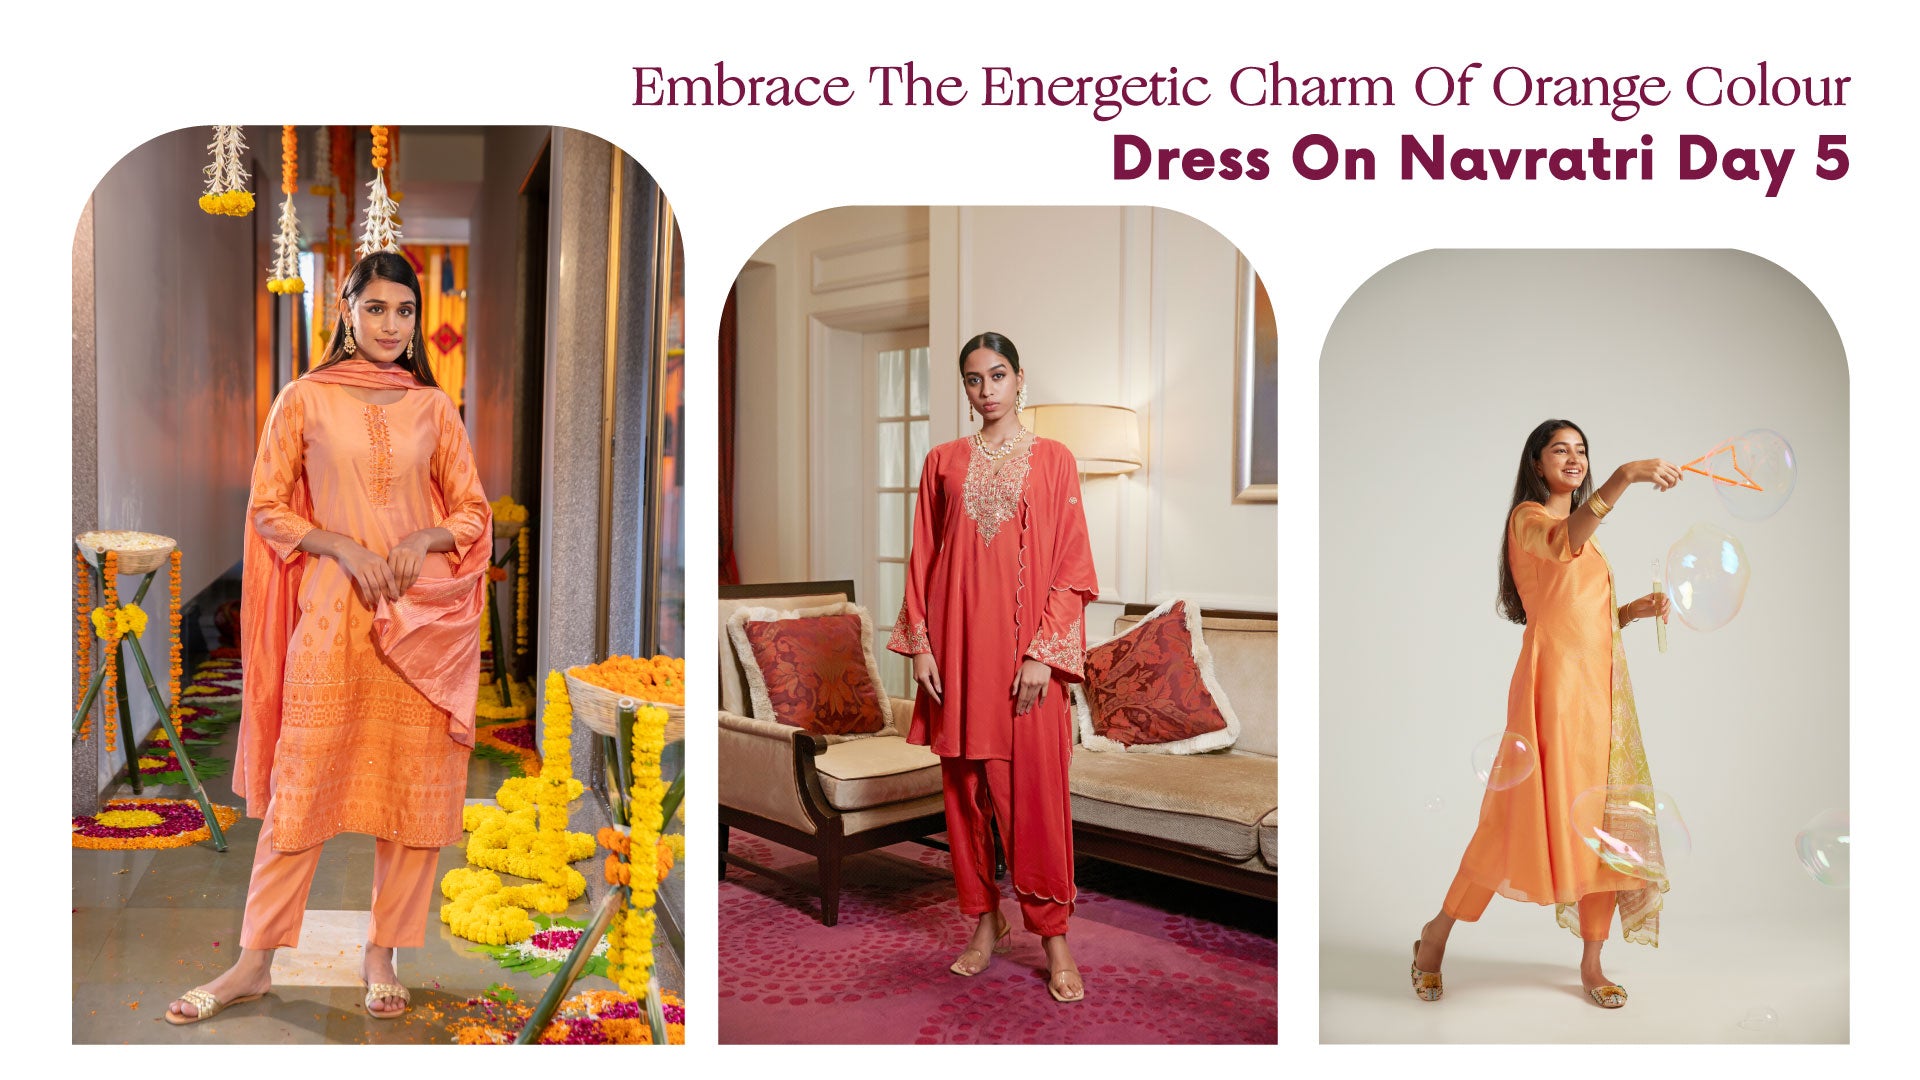 Embrace The Energetic Charm Of Orange Colour Dress On Navratri Day 5